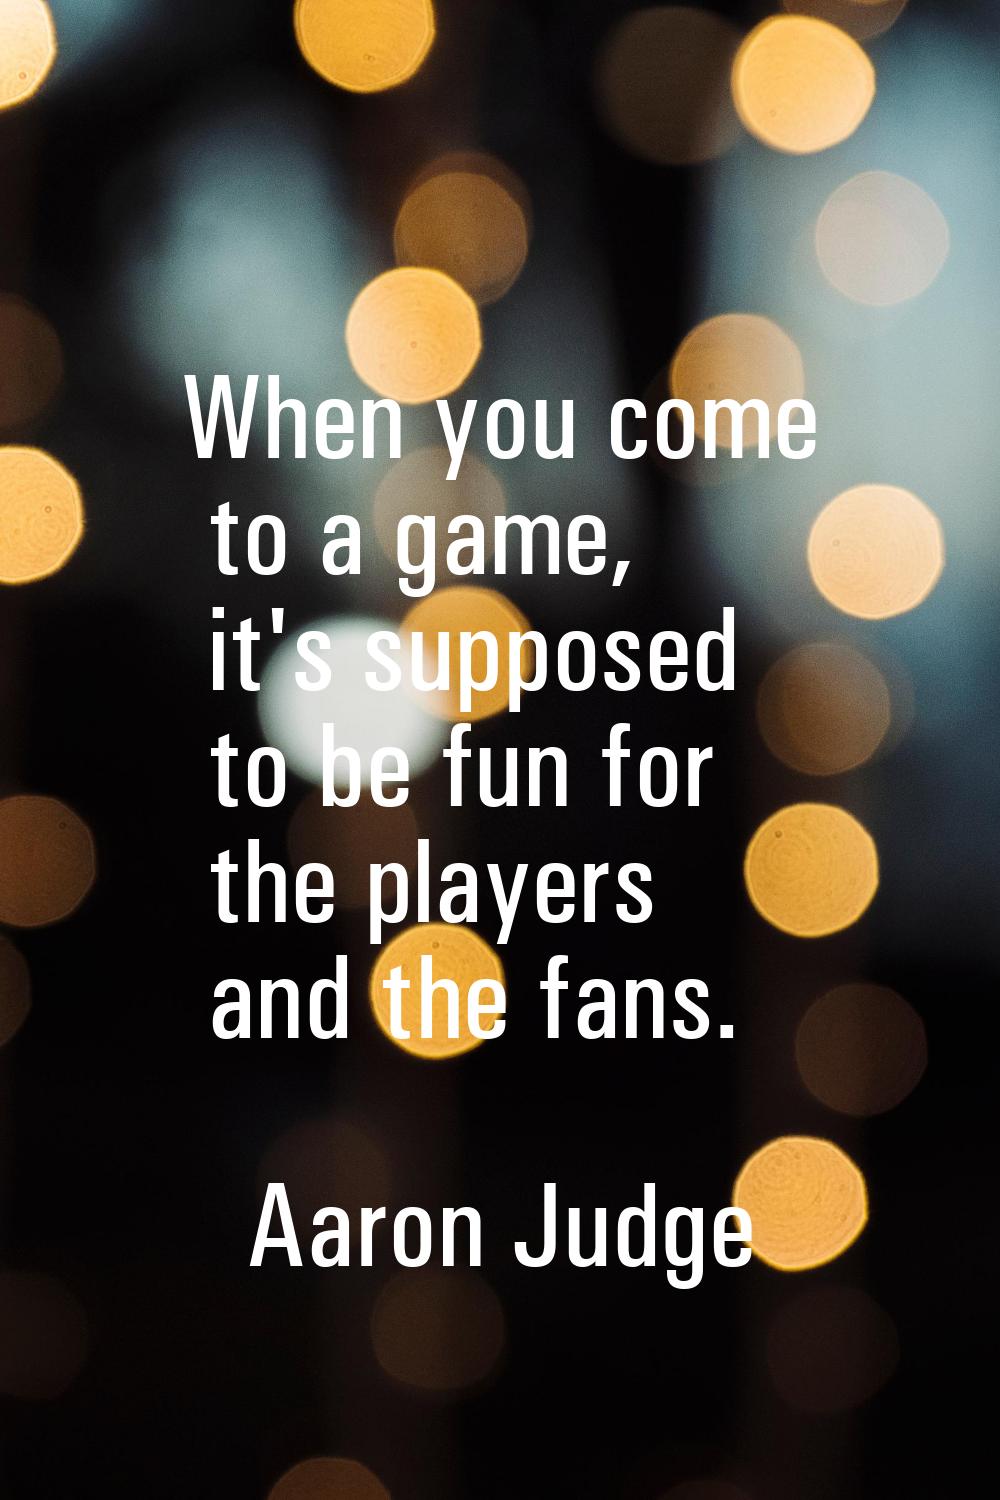 When you come to a game, it's supposed to be fun for the players and the fans.